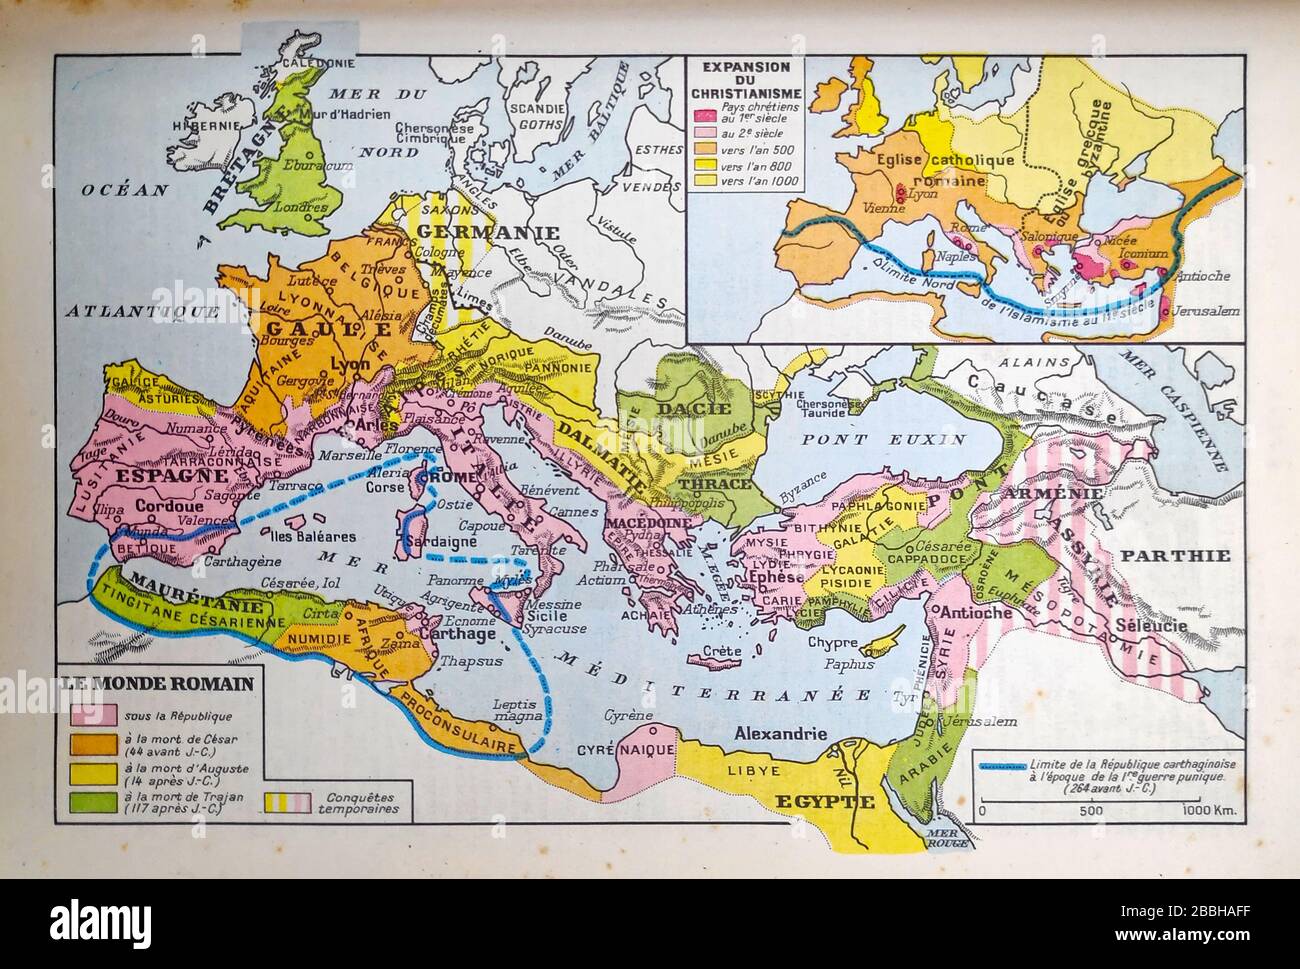 Old map of the Roman Empire printed in the late 19th century. Stock Photo